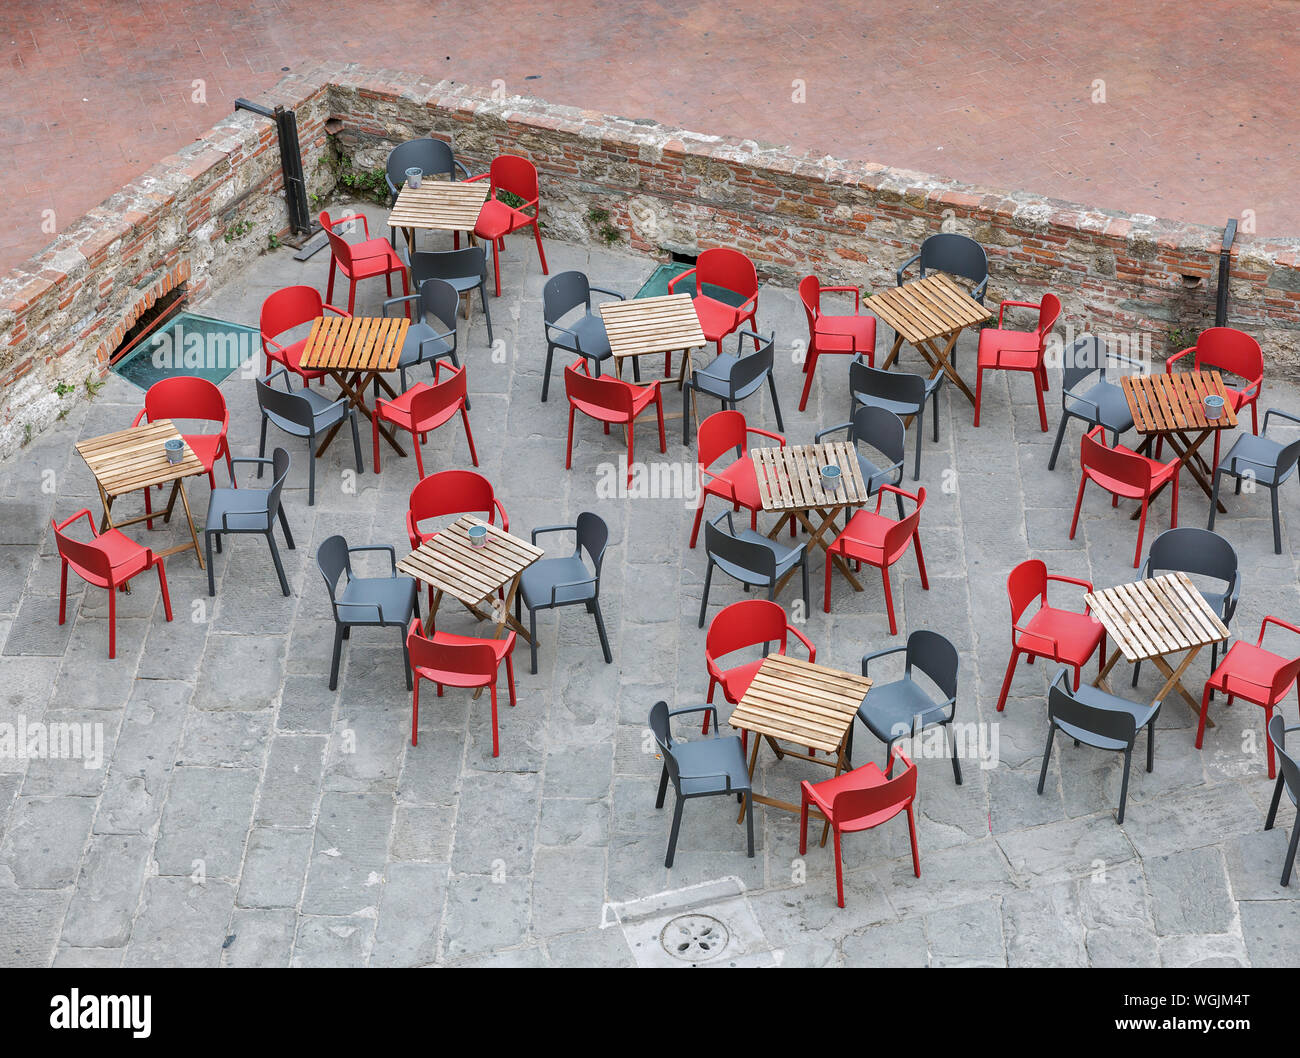 Empty cafe wooden tables and red and black chairs, view from above. Livorno Old Fortress, Italy. Stock Photo